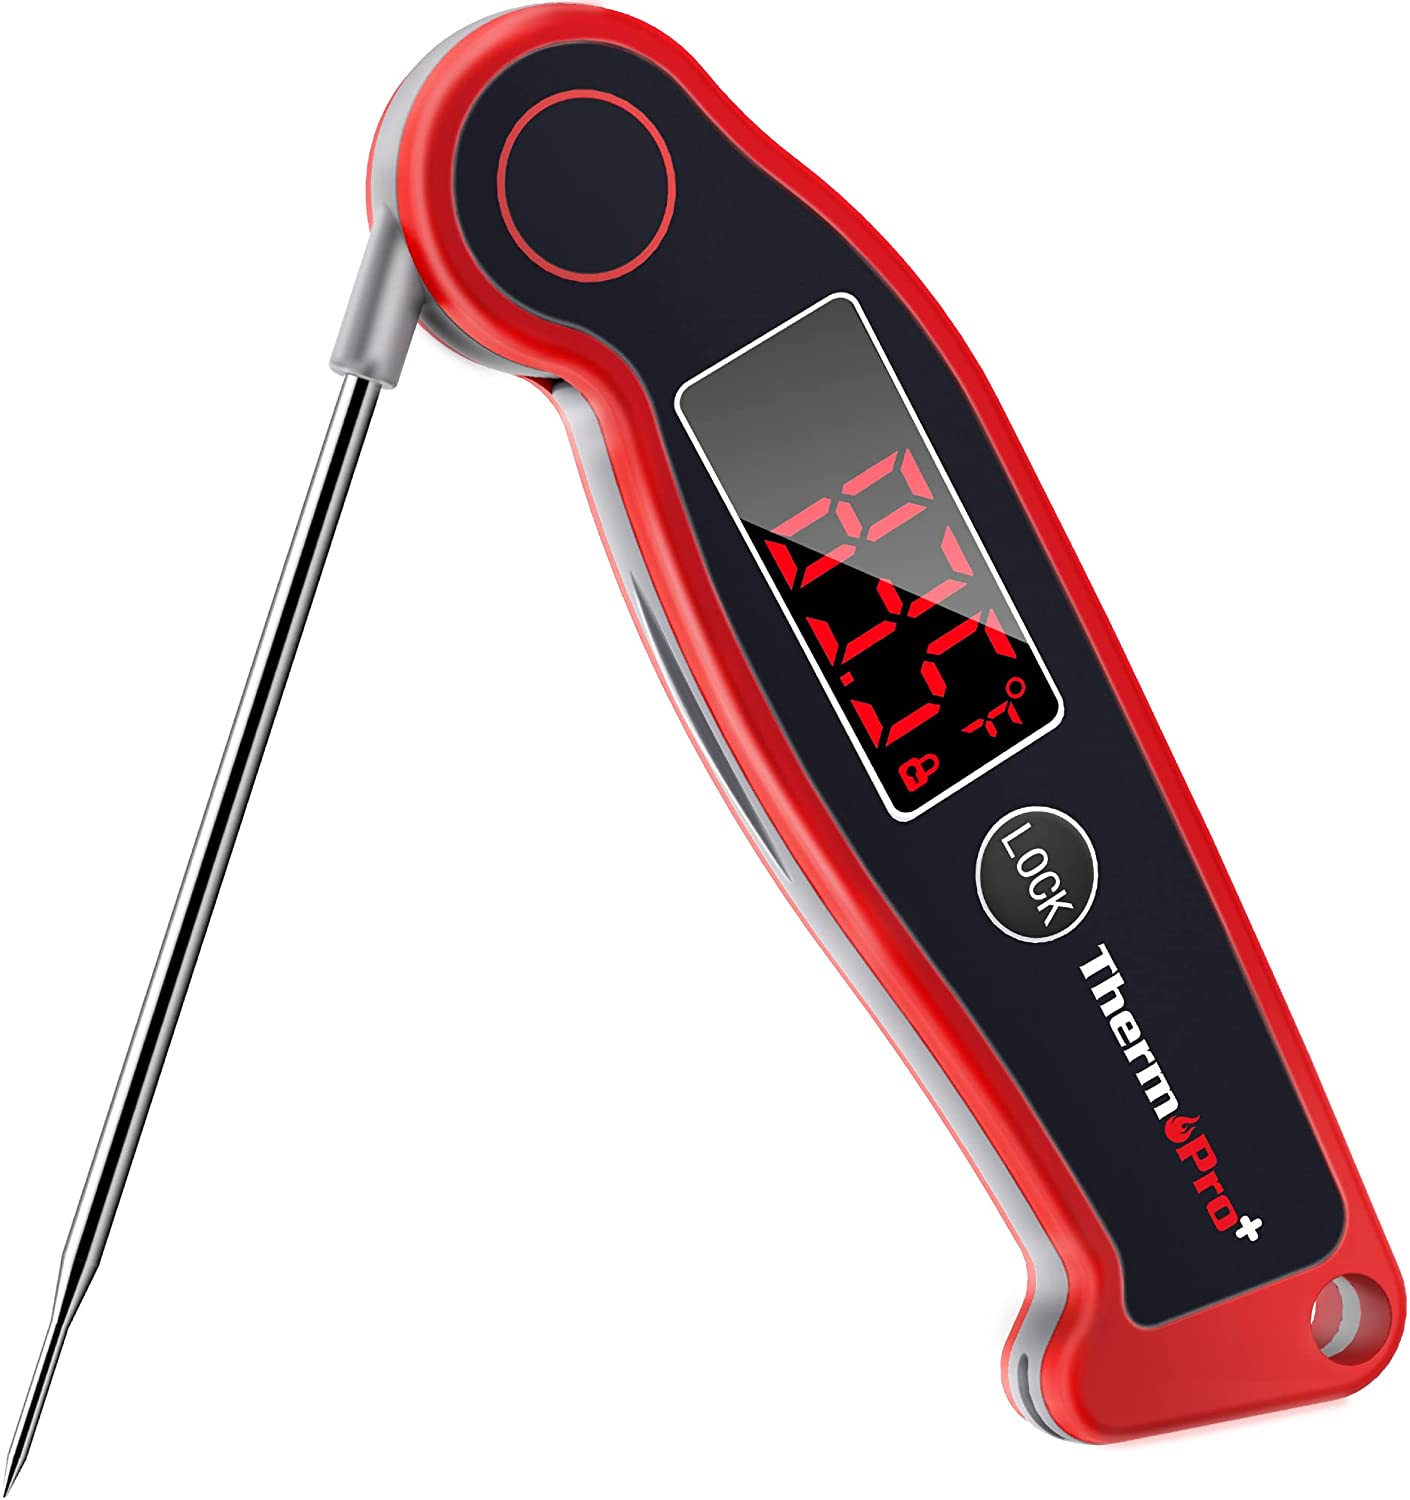 ThermoPro TP-19 TP19 Waterproof Digital Meat Thermometer for Grilling with Ambidextrous Backlit & Thermocouple Instant Read Thermometer Kitchen Cooking Food Thermometer